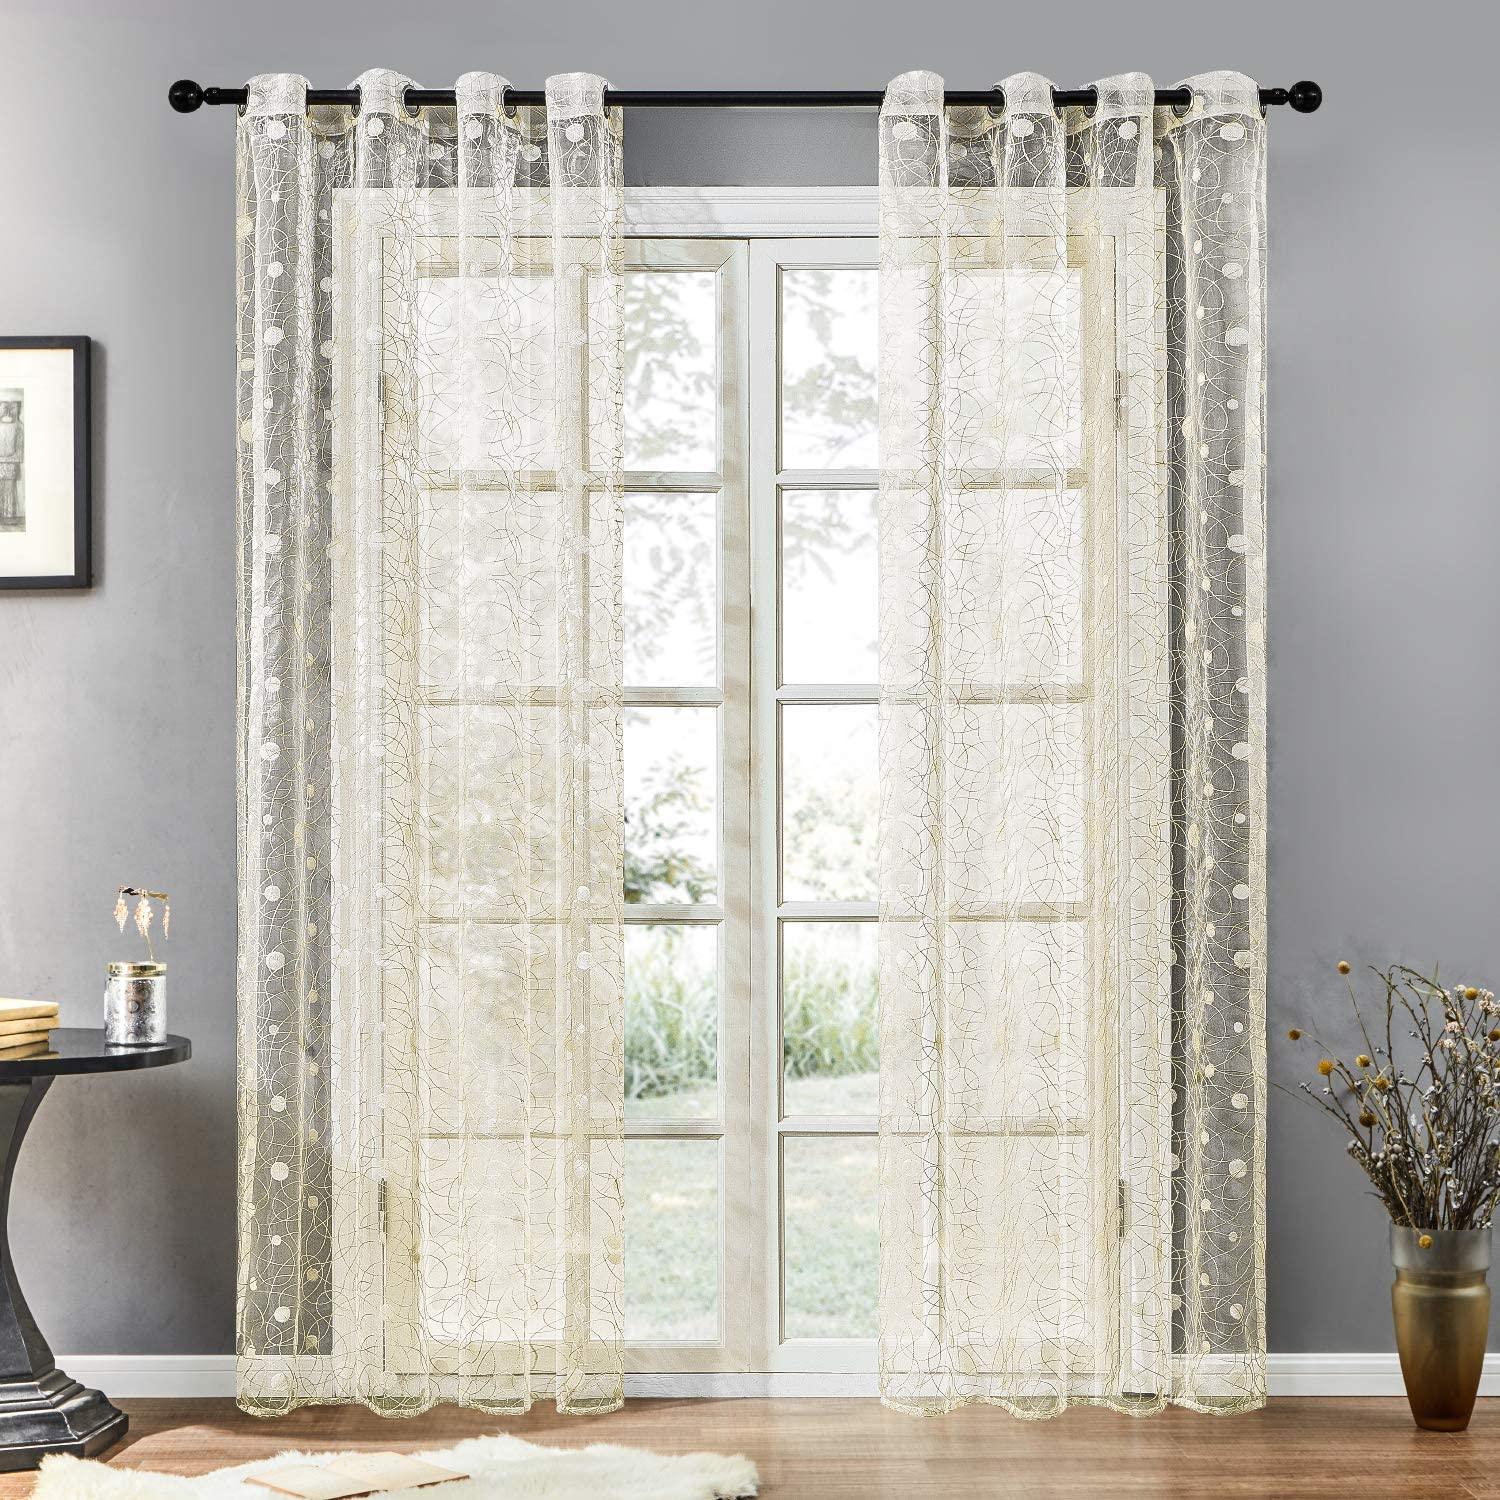 Classic Curtain Designs- Embroidered White Sheer Drapes,Dot Voile Curtains For Living Room,Bedroom,Nursery Grommet Window Curtains,1 Panel - Topfinel